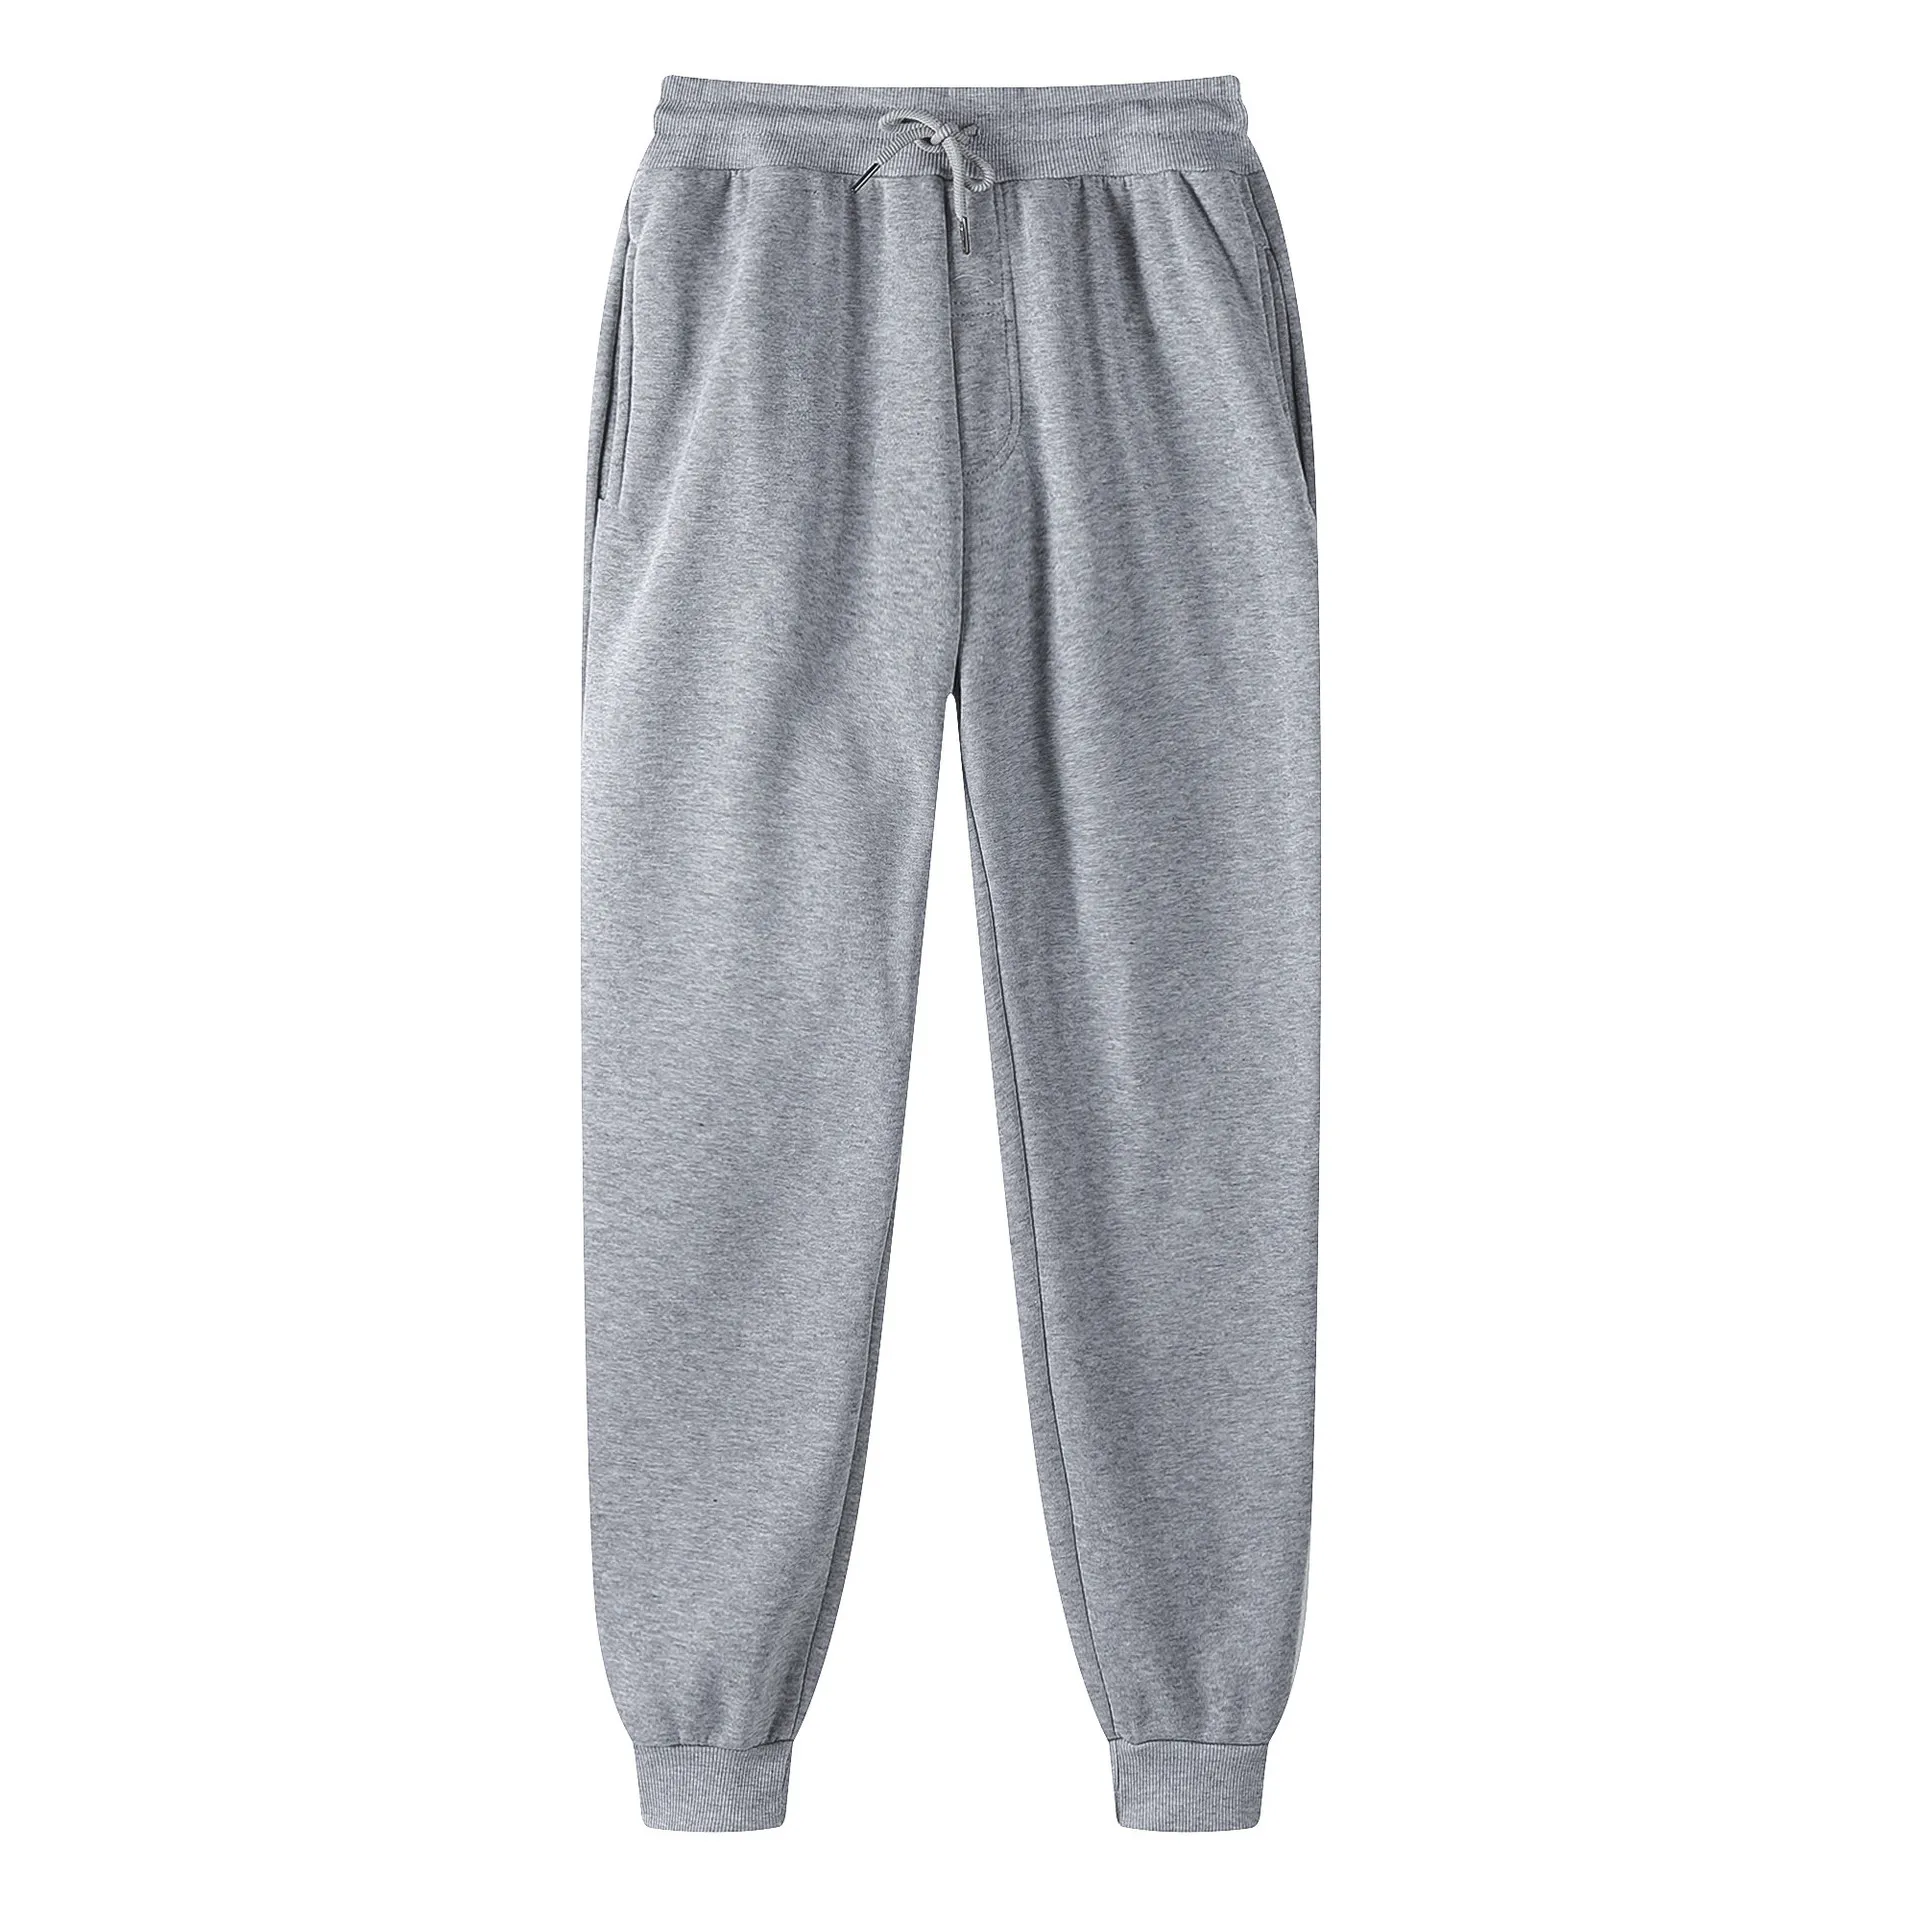 

Custom Sweatpants High Quality Padded Sweat Pants for Cold Weather Winter Men Jogger Pants Fleece Casual Quantity Cozy Cotton